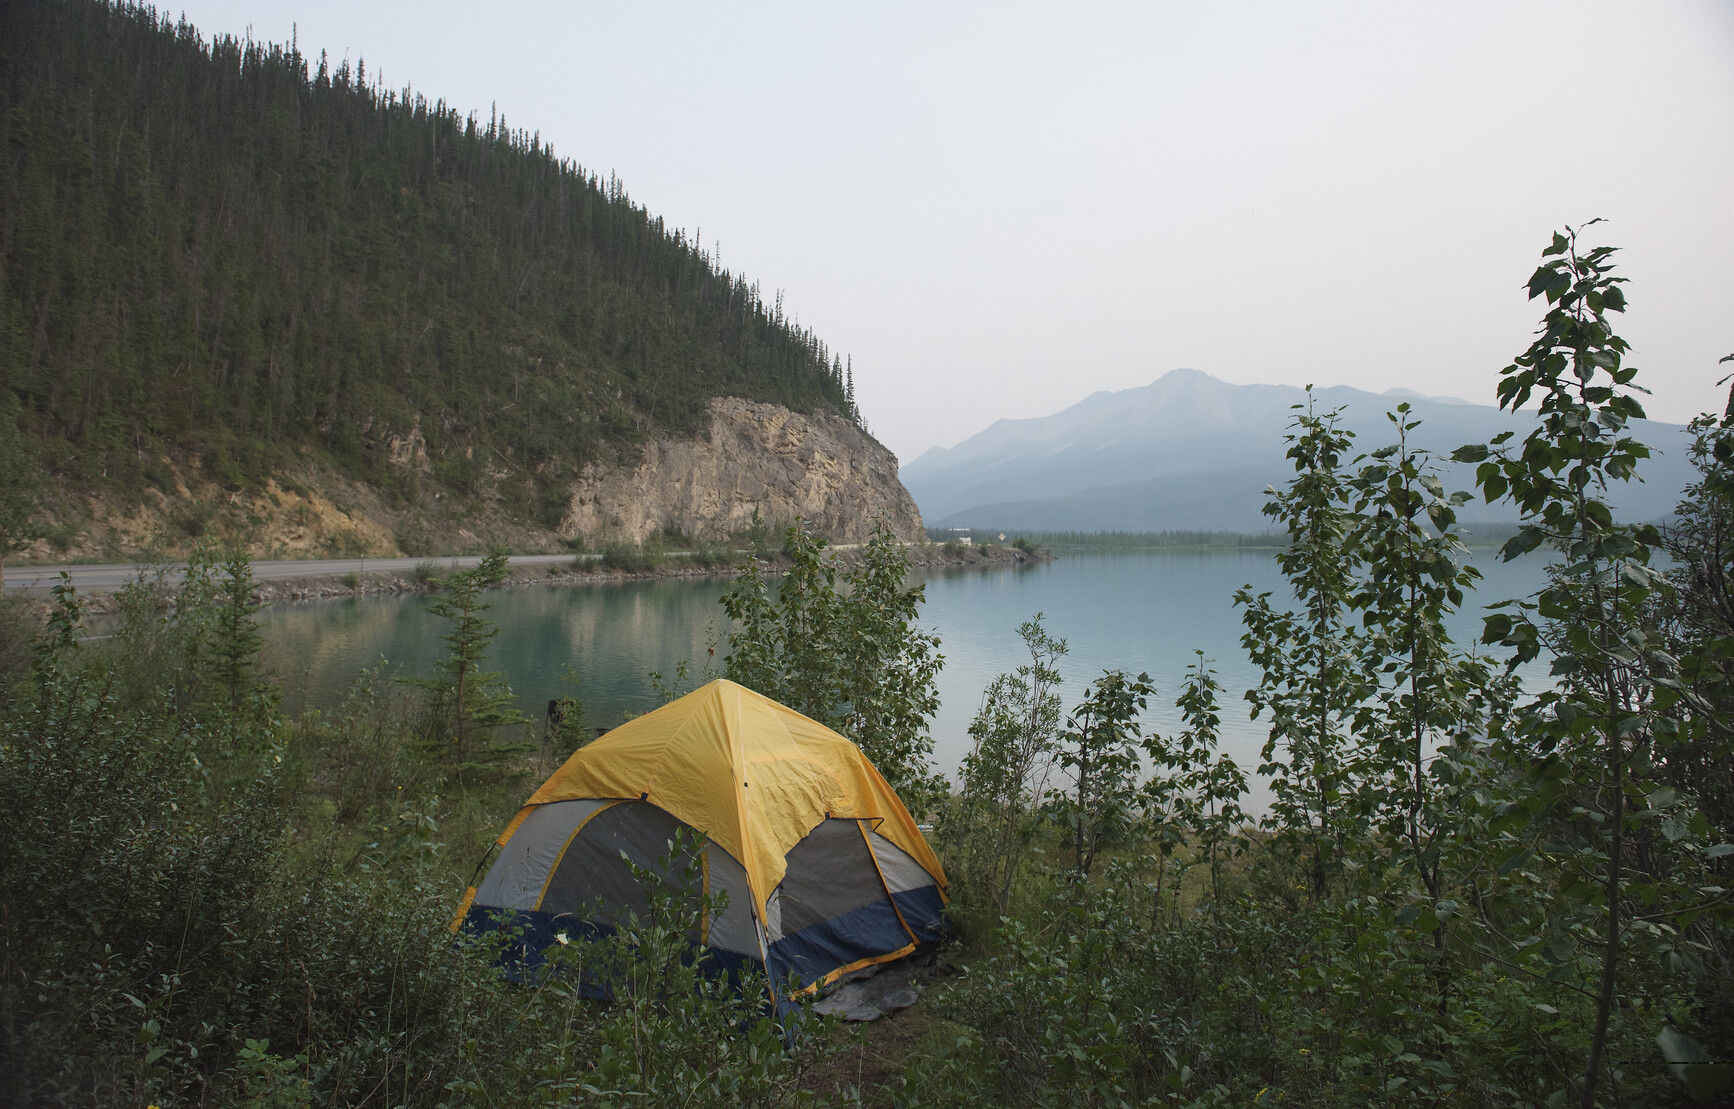 A tent set up in grass and shrubs beside Munch Lake. The road is visible winding alongside the lake. Forested mountains in the distance. Muncho Lake Park.